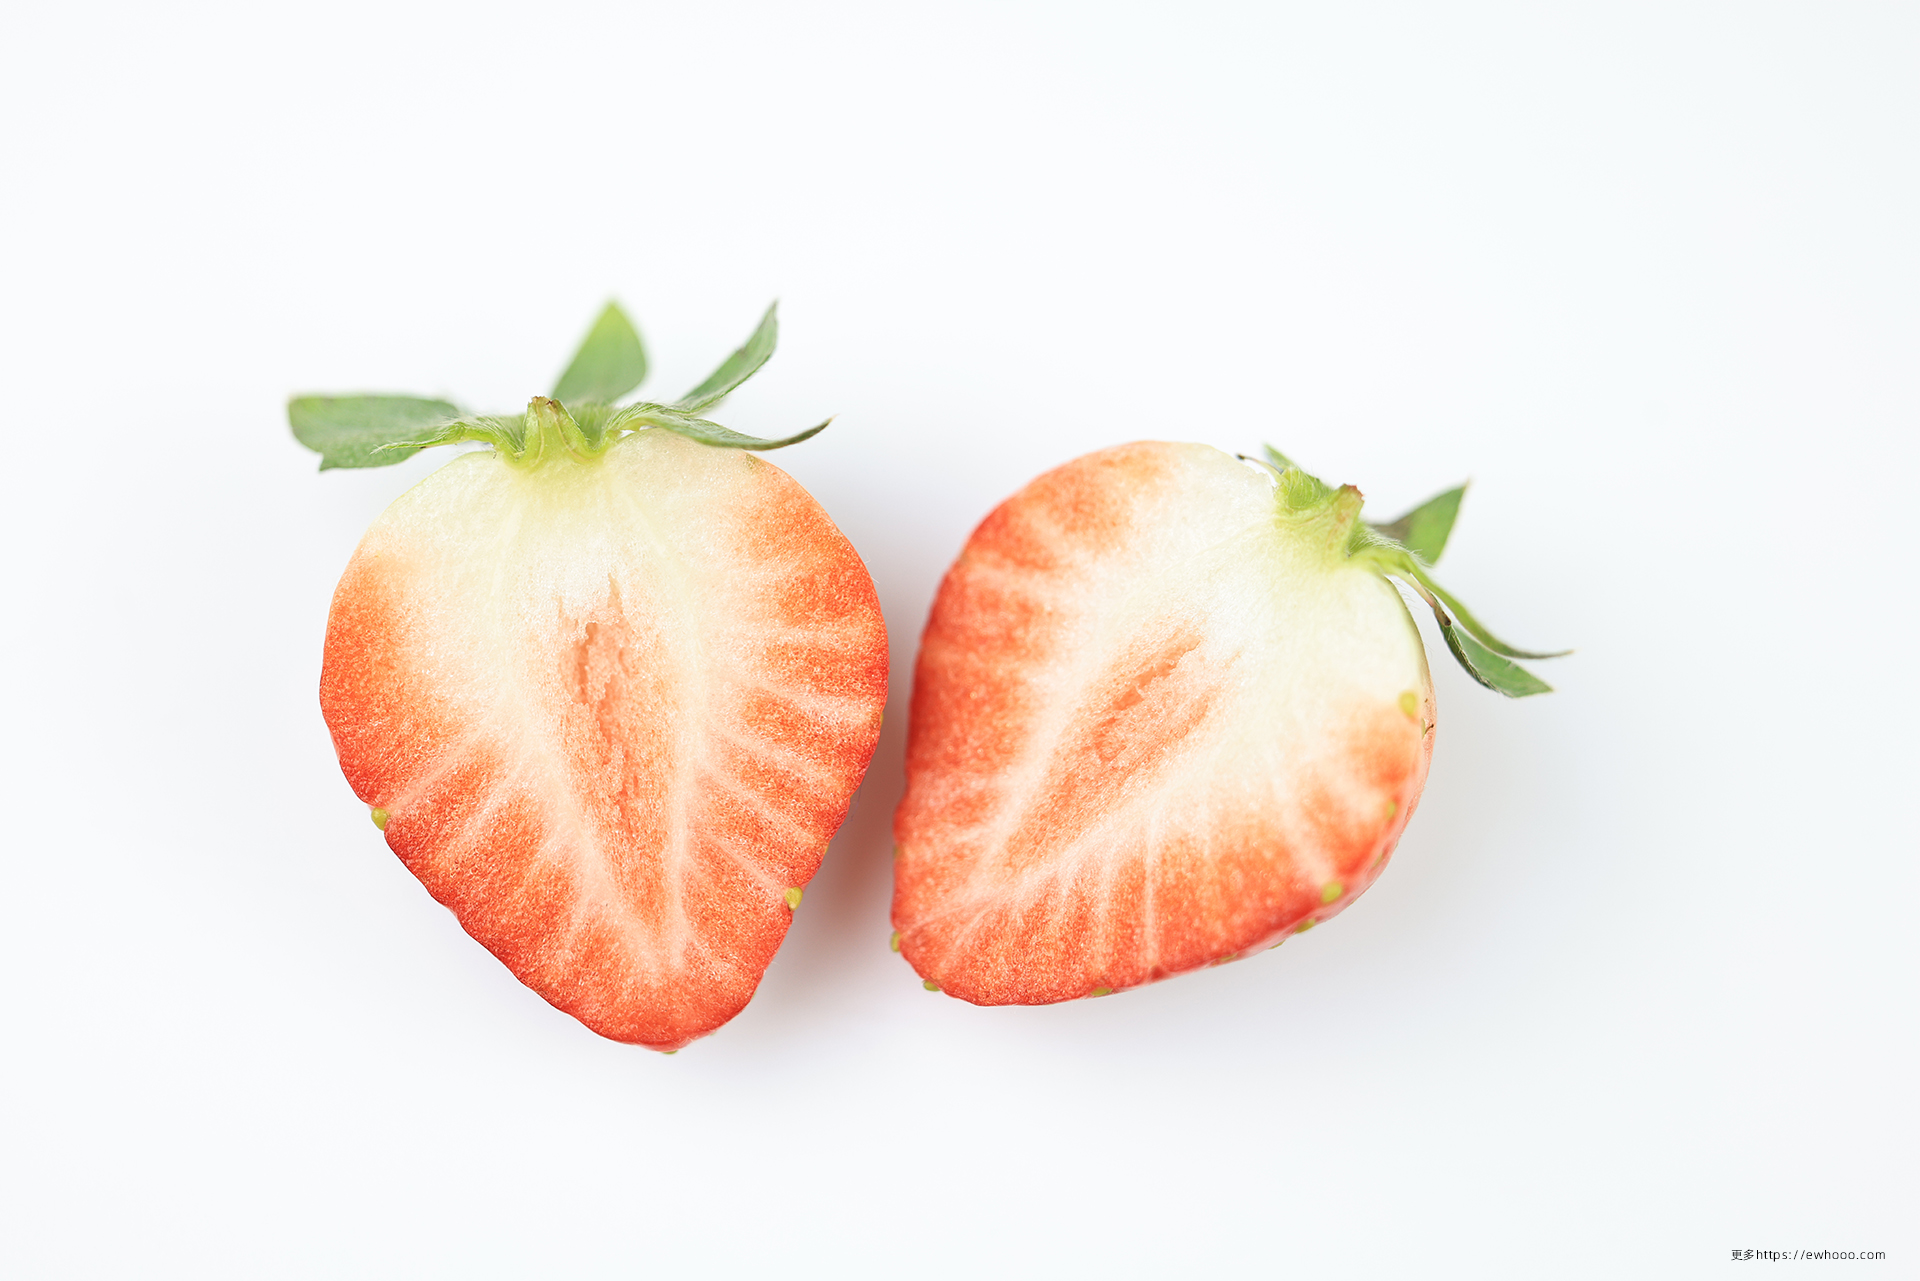 General 1920x1281 strawberries fruit food white background